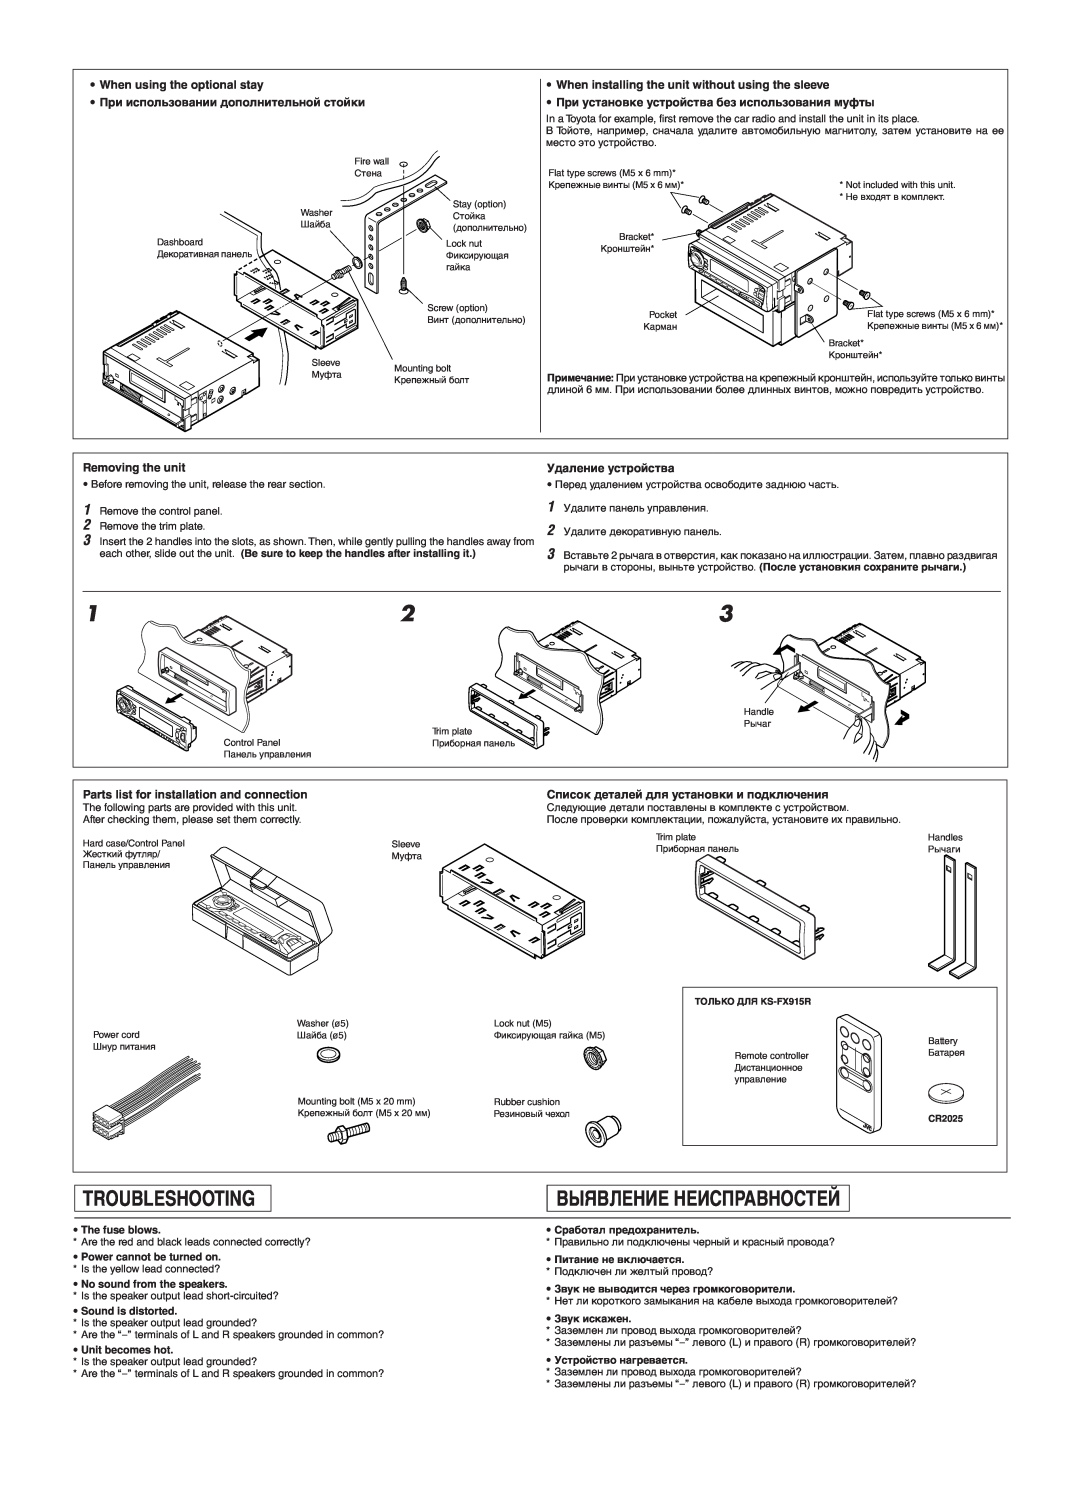 JVC KS-FX815 Troubleshooting, Bыявление Неисправностей, When installing the unit without using the sleeve, The fuse blows 